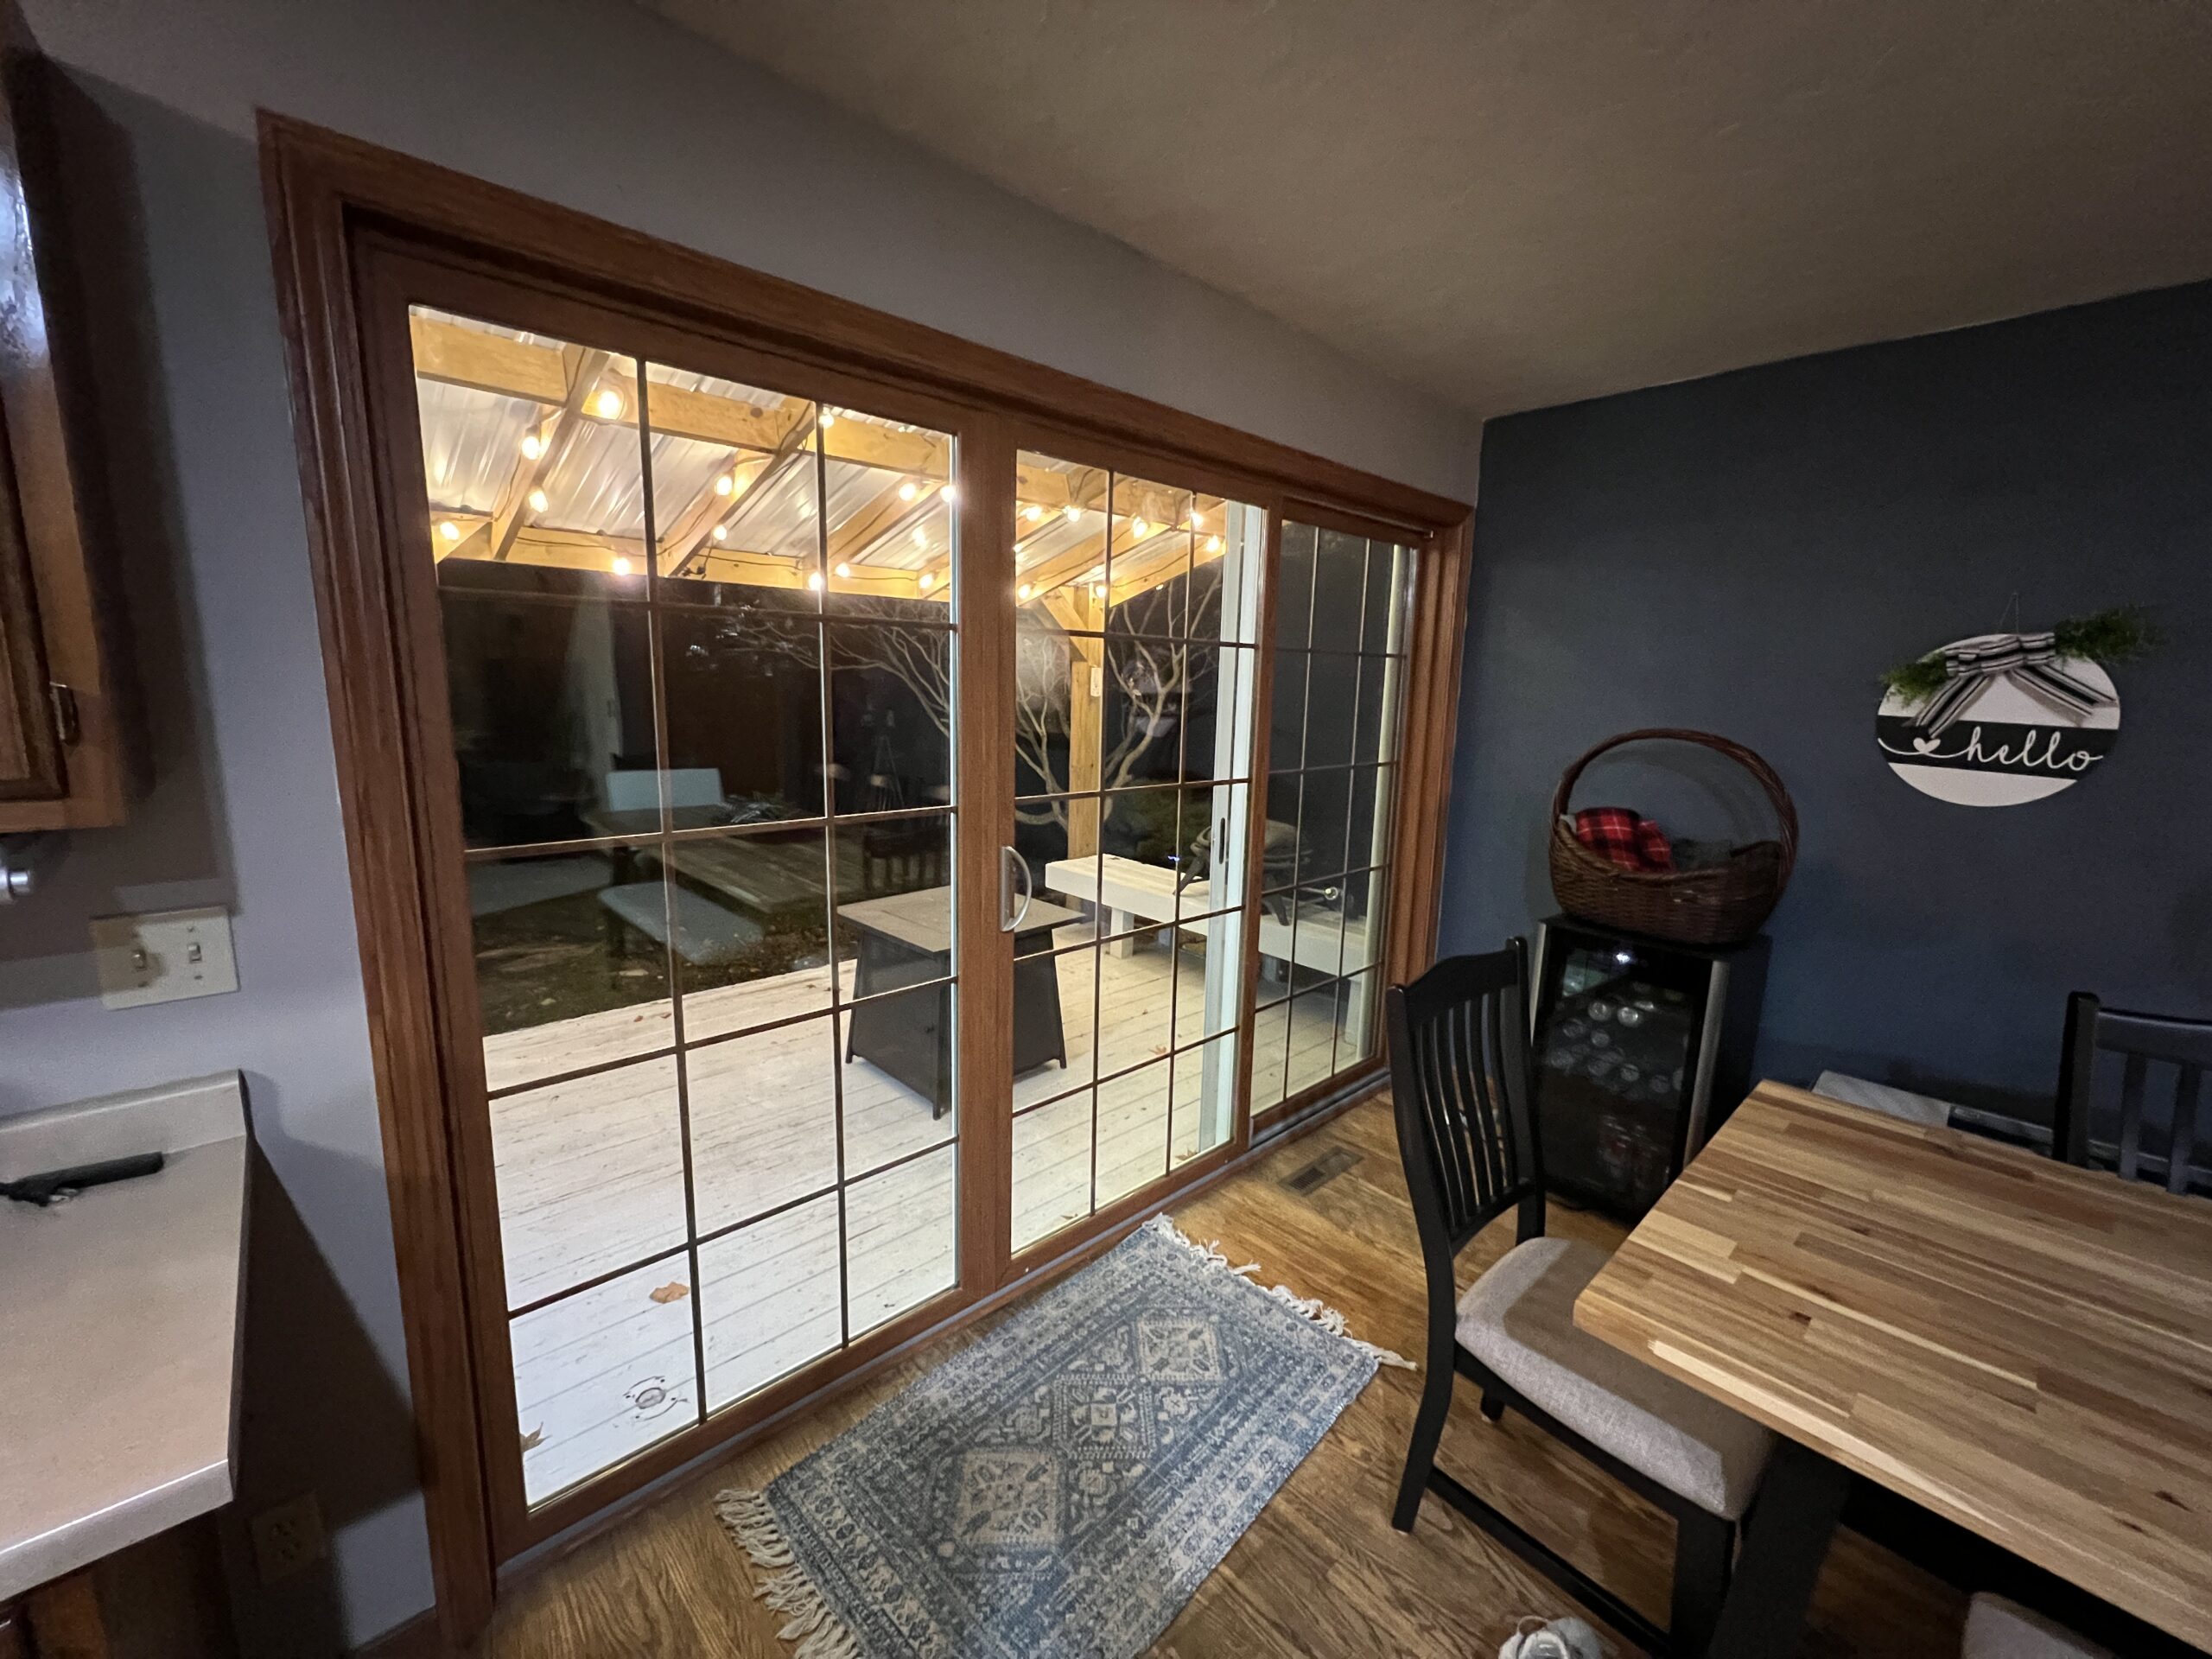 Large patio door from dining room